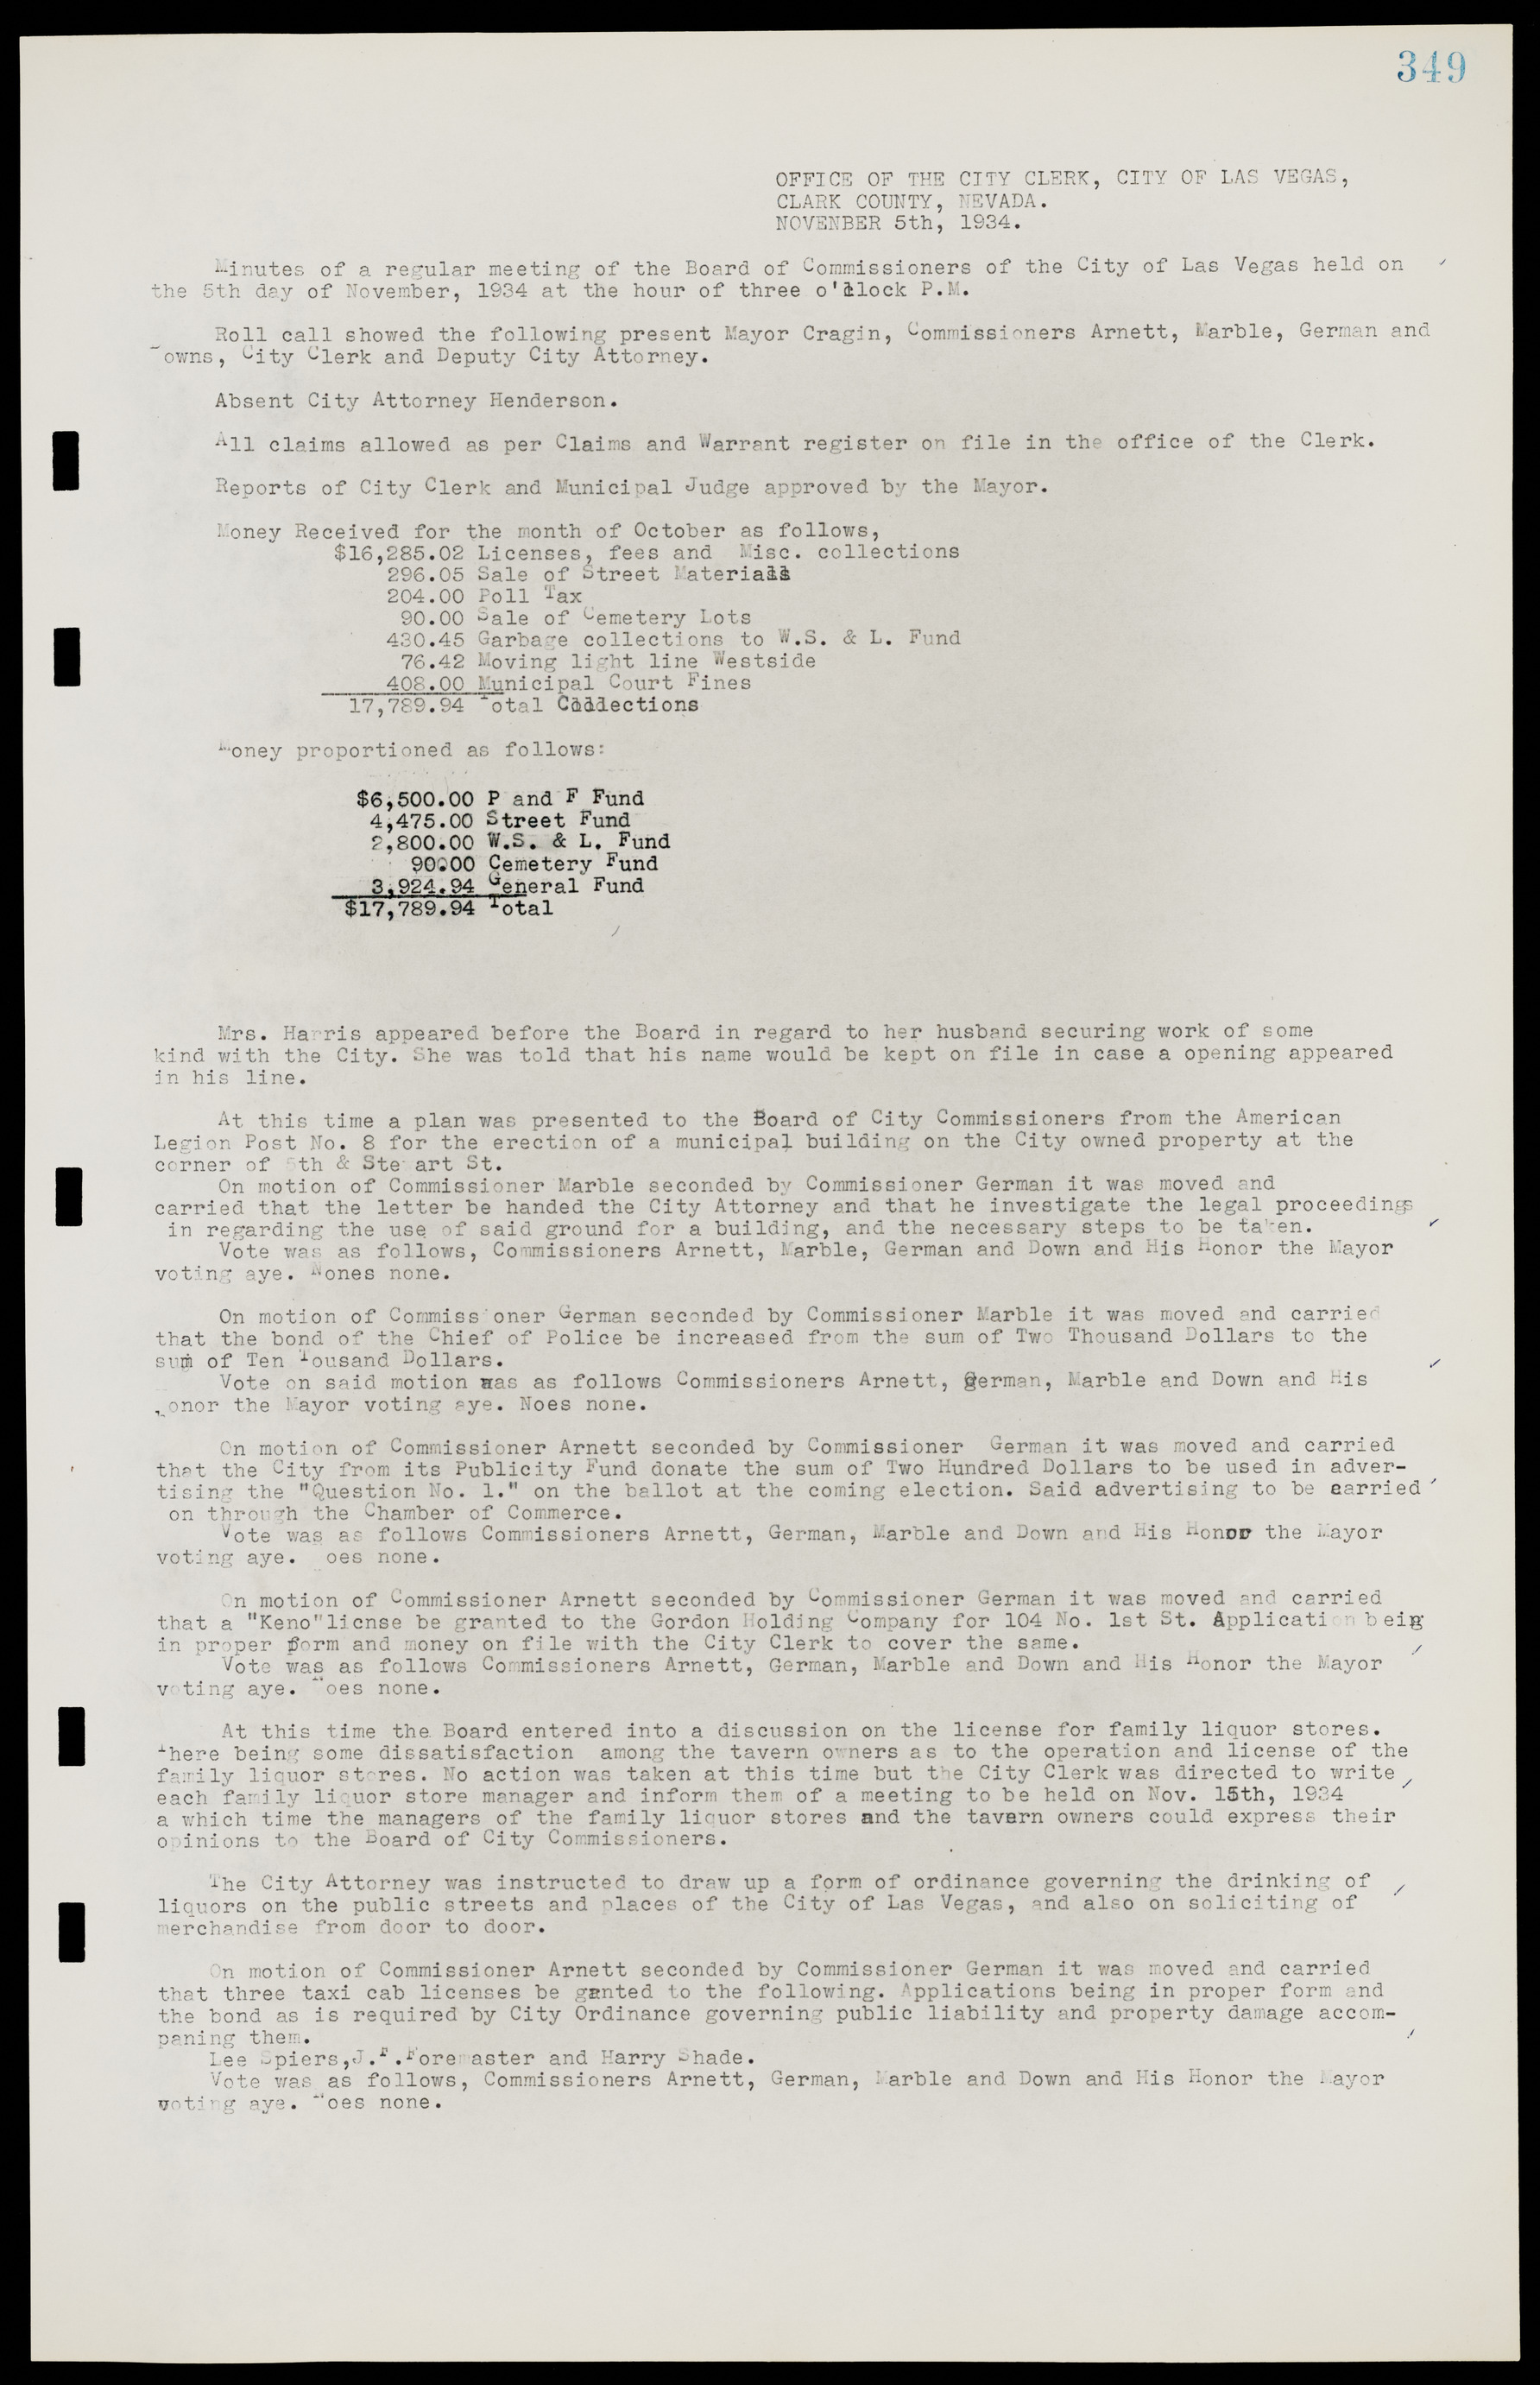 Las Vegas City Commission Minutes, May 14, 1929 to February 11, 1937, lvc000003-356